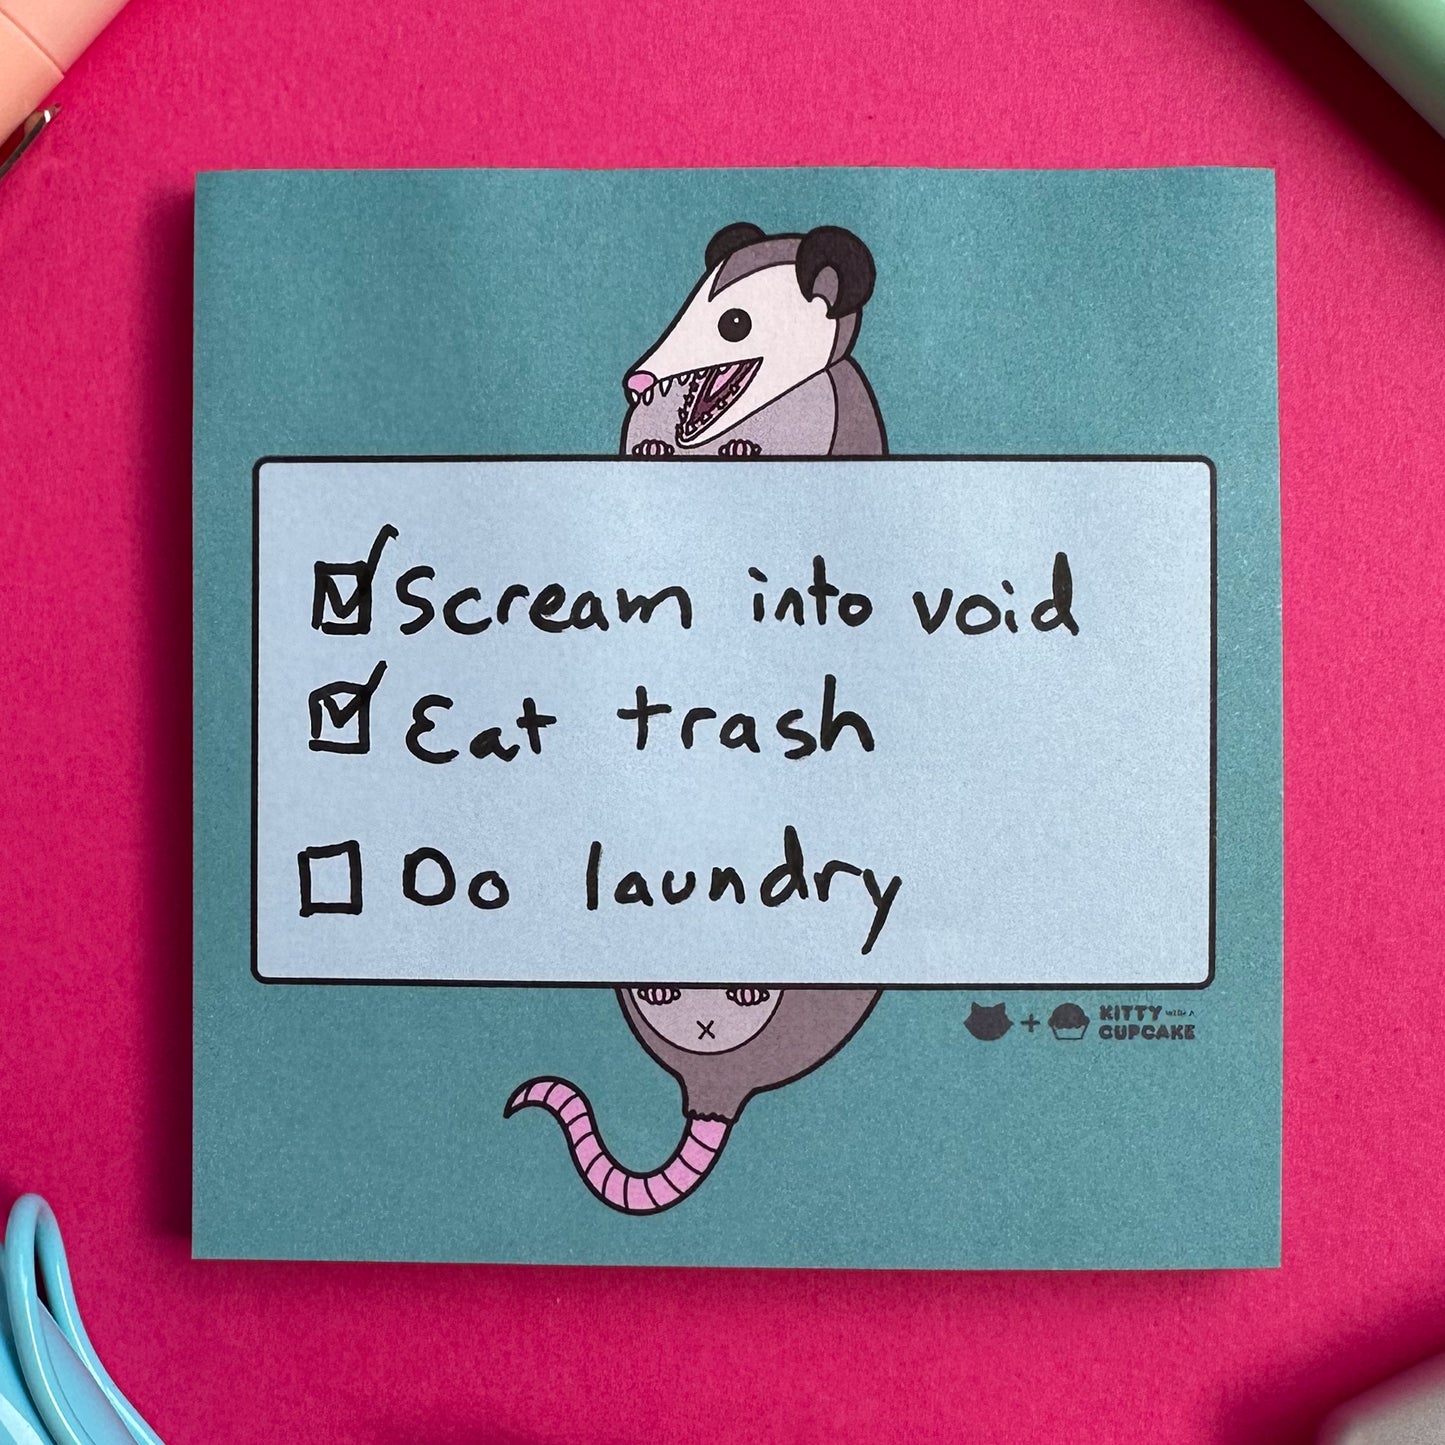 A blue square sticky note pad featuring an illustration of an opossum holding a light blue rectangle with a list written in it. The checklist reads "Scream into void, Eat Trash, Do Laundry" the first two items are checked off but the last is not. The sticky notes are on a hot pink background with some pens around them. 